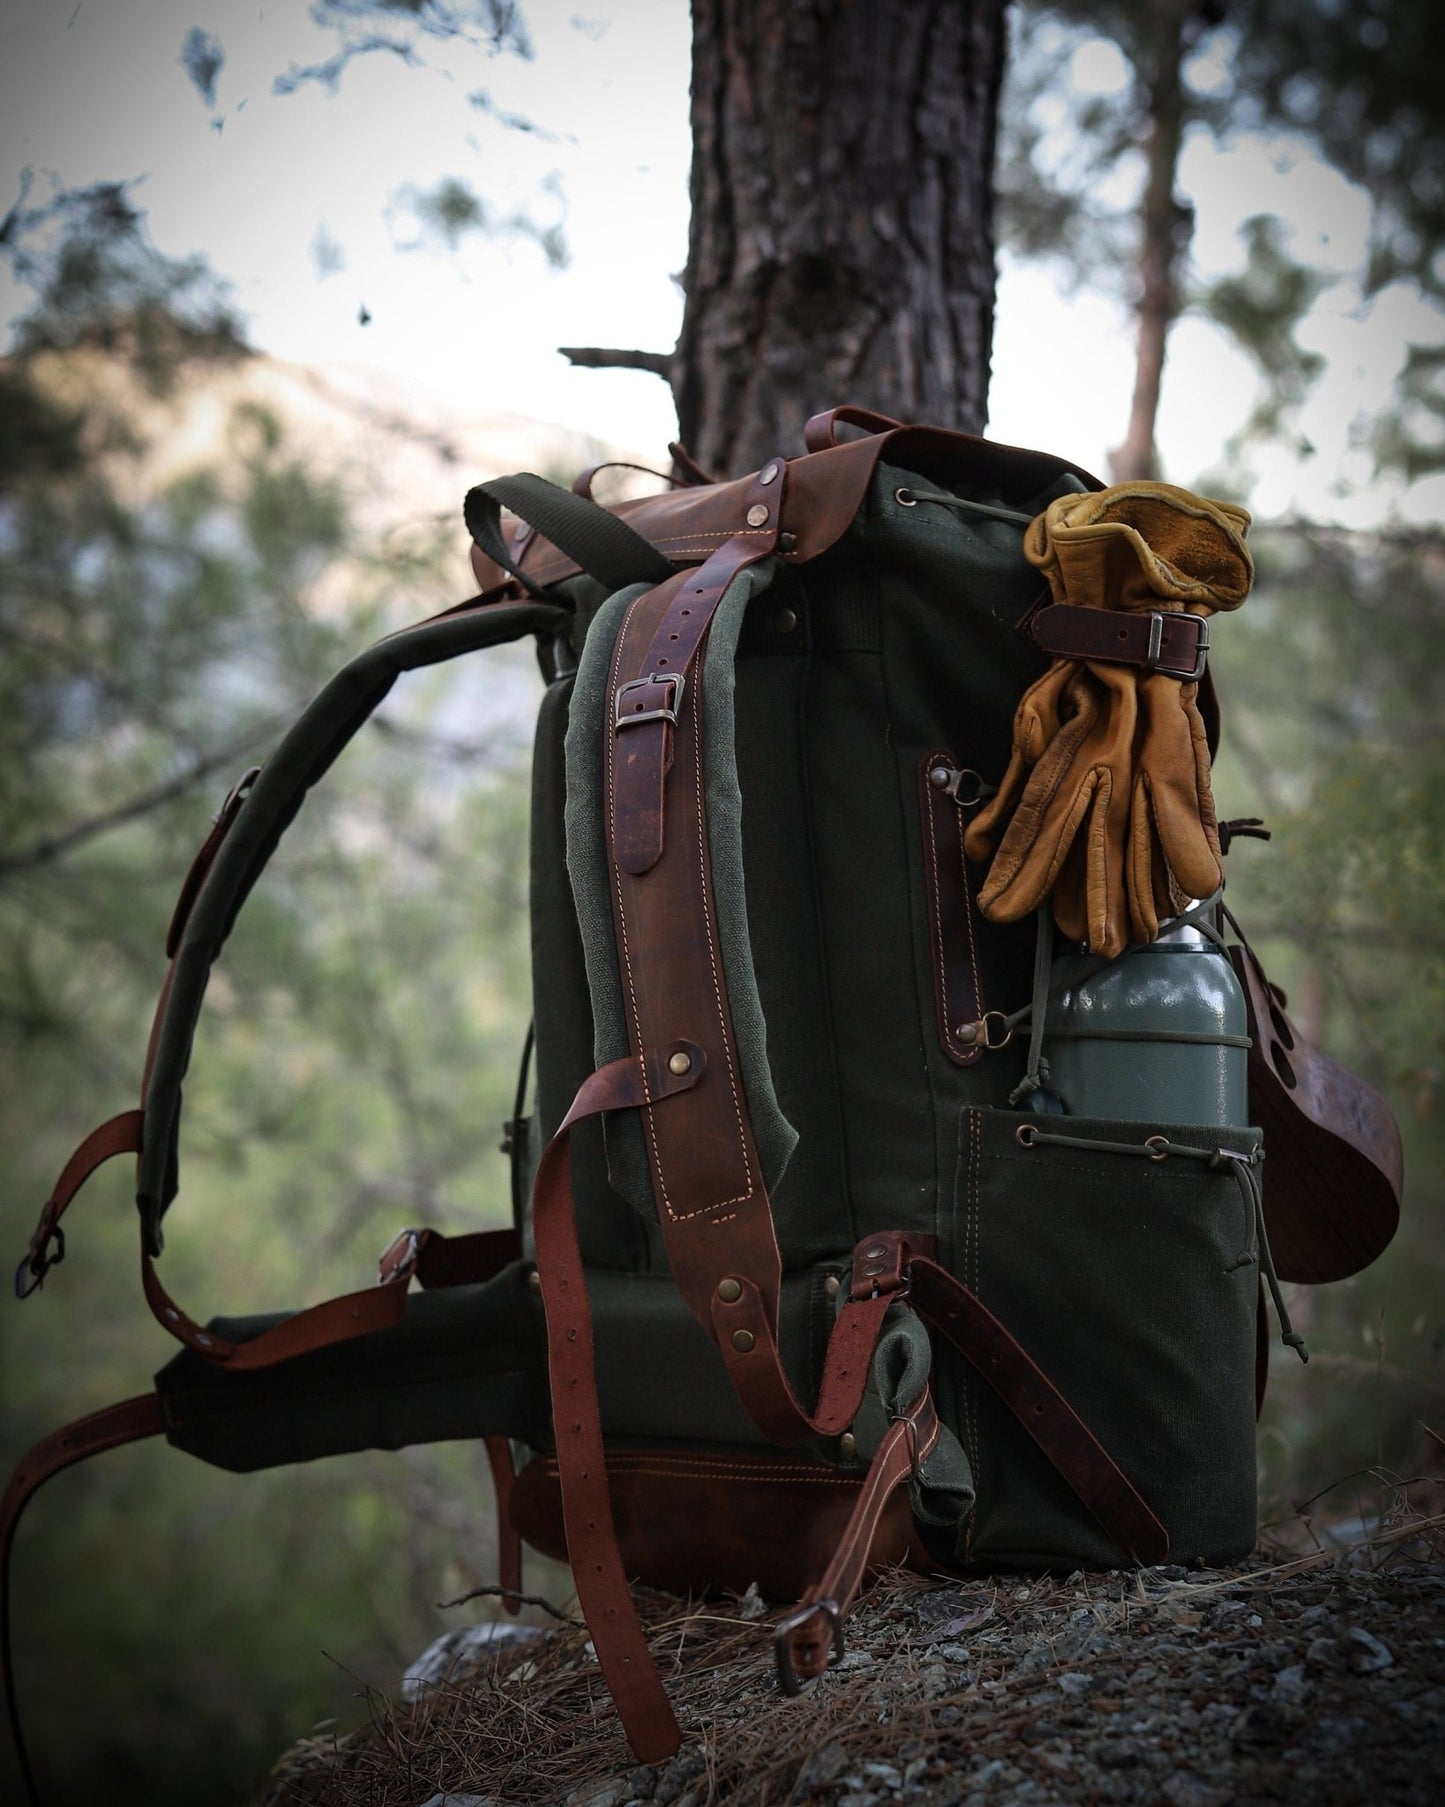 80L to 30L Size Options | Extra large | Handmade | Leather | Waxed Canvas Backpack | Camping, Hunting, Bushcraft, Travel | Personalization Backpack,rucksack 99percenthandmade   